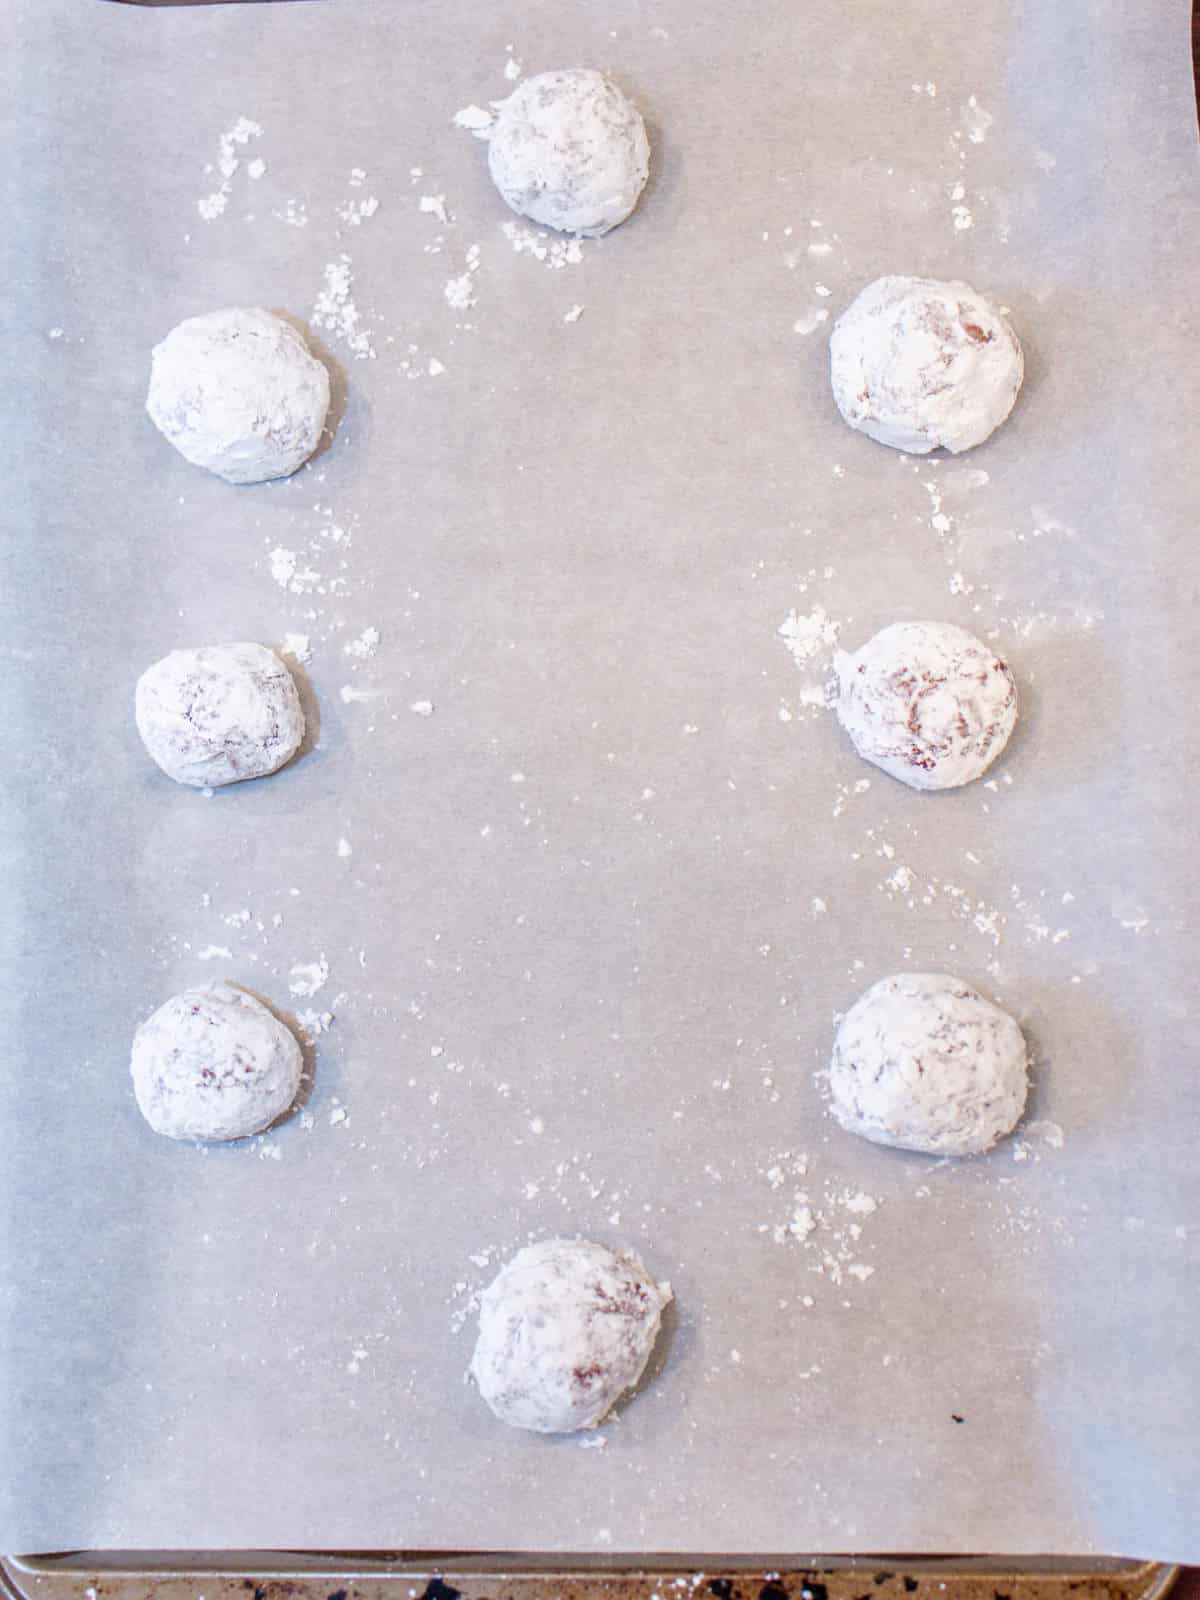 unbaked powdered sugar covered cookie balls on parchment paper covered baking sheet.